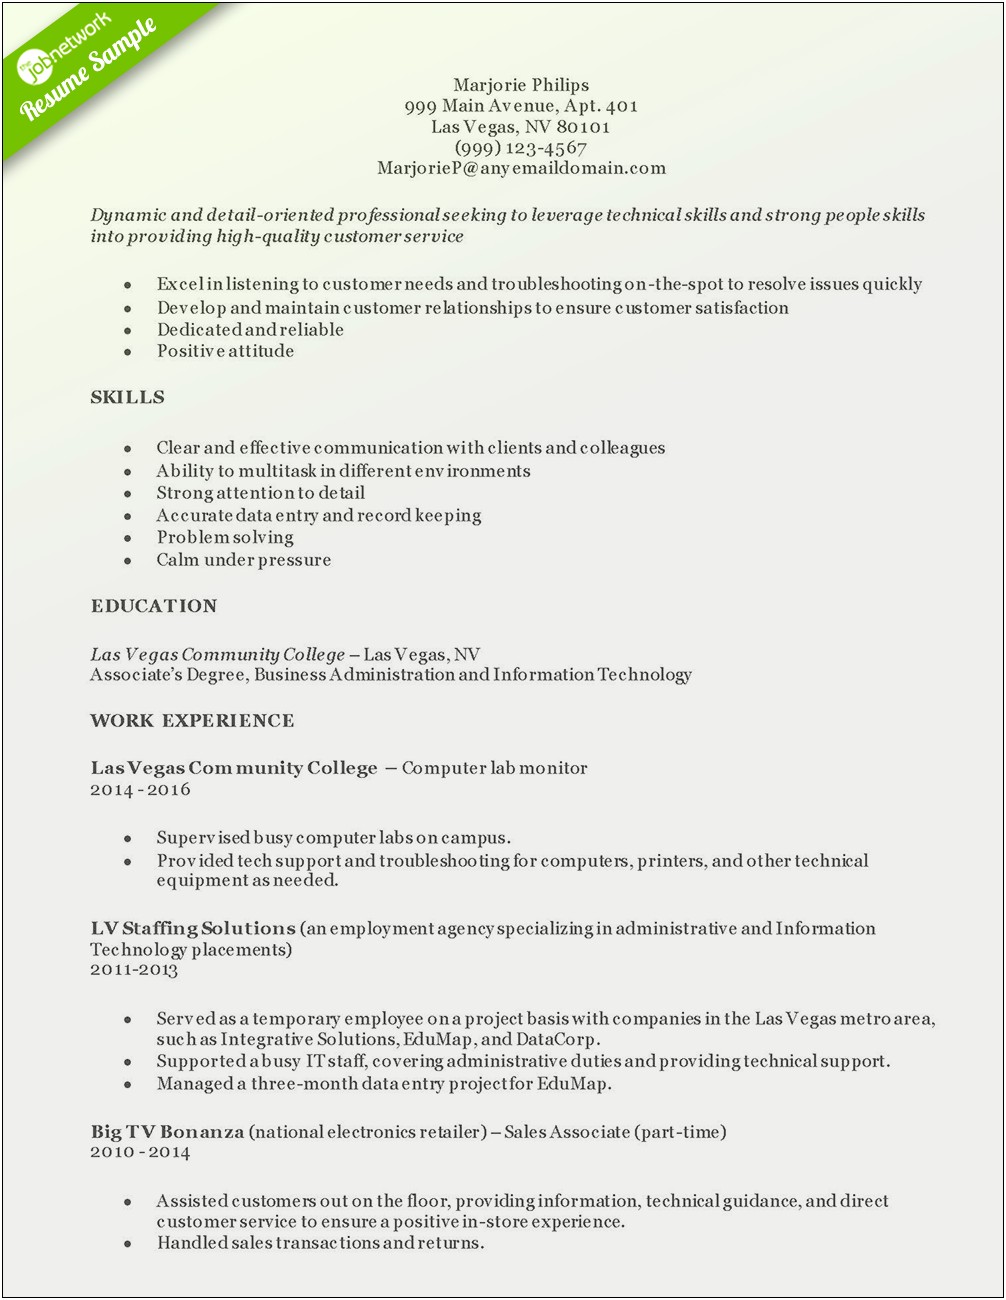 Sample Part Time Employment Resume